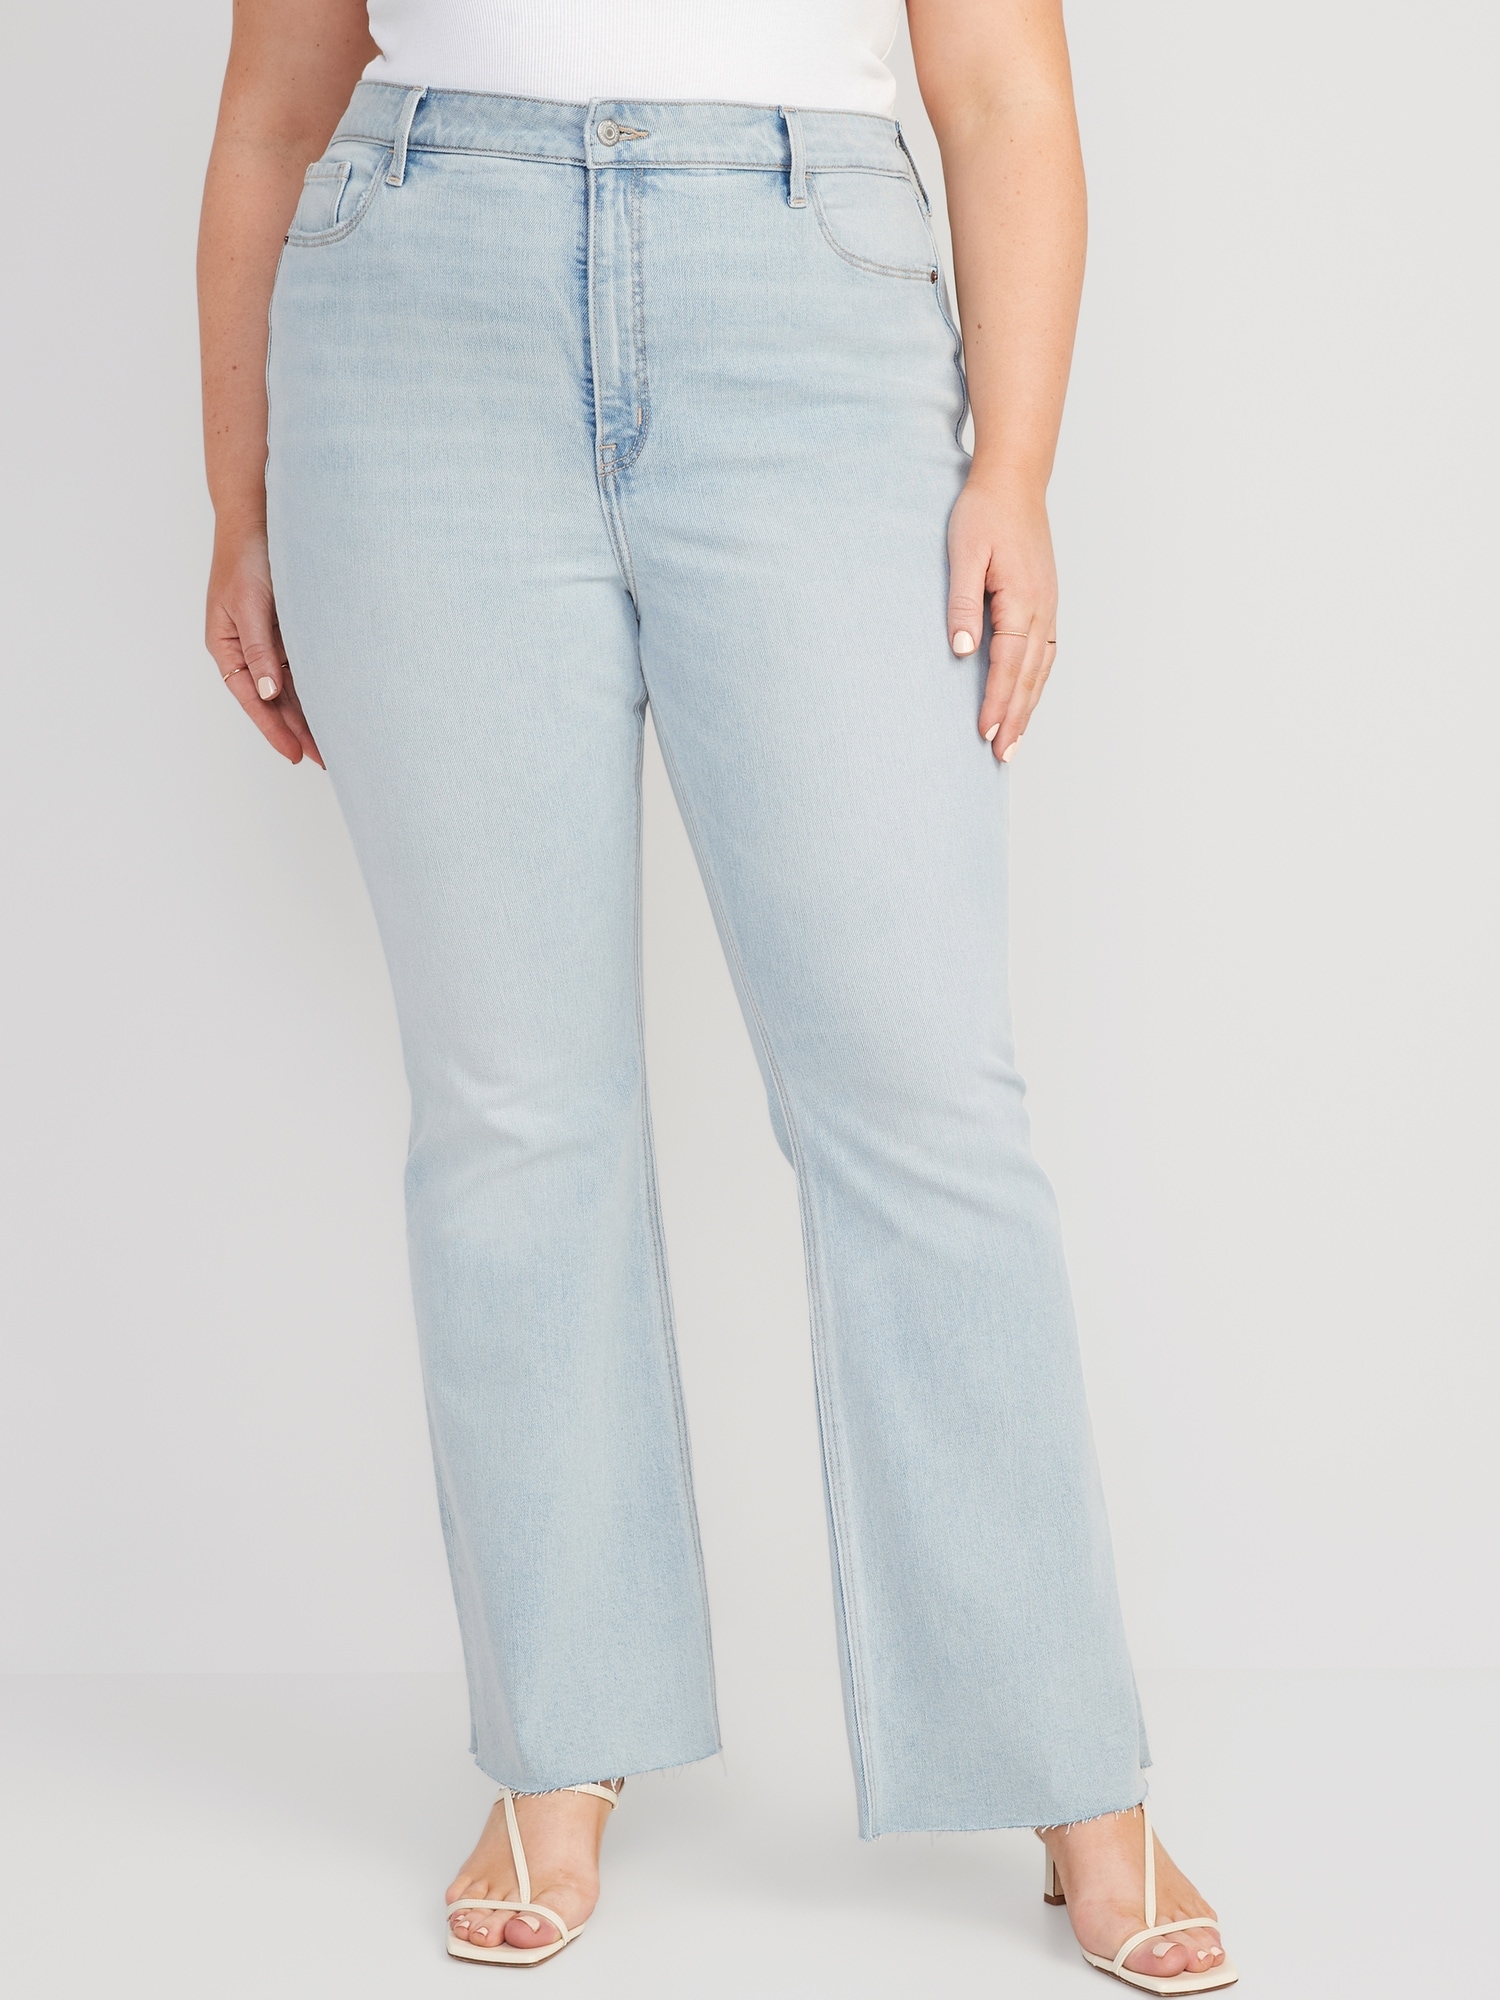 Higher High-Waisted Cut-Off Flare Jeans for Women | Old Navy